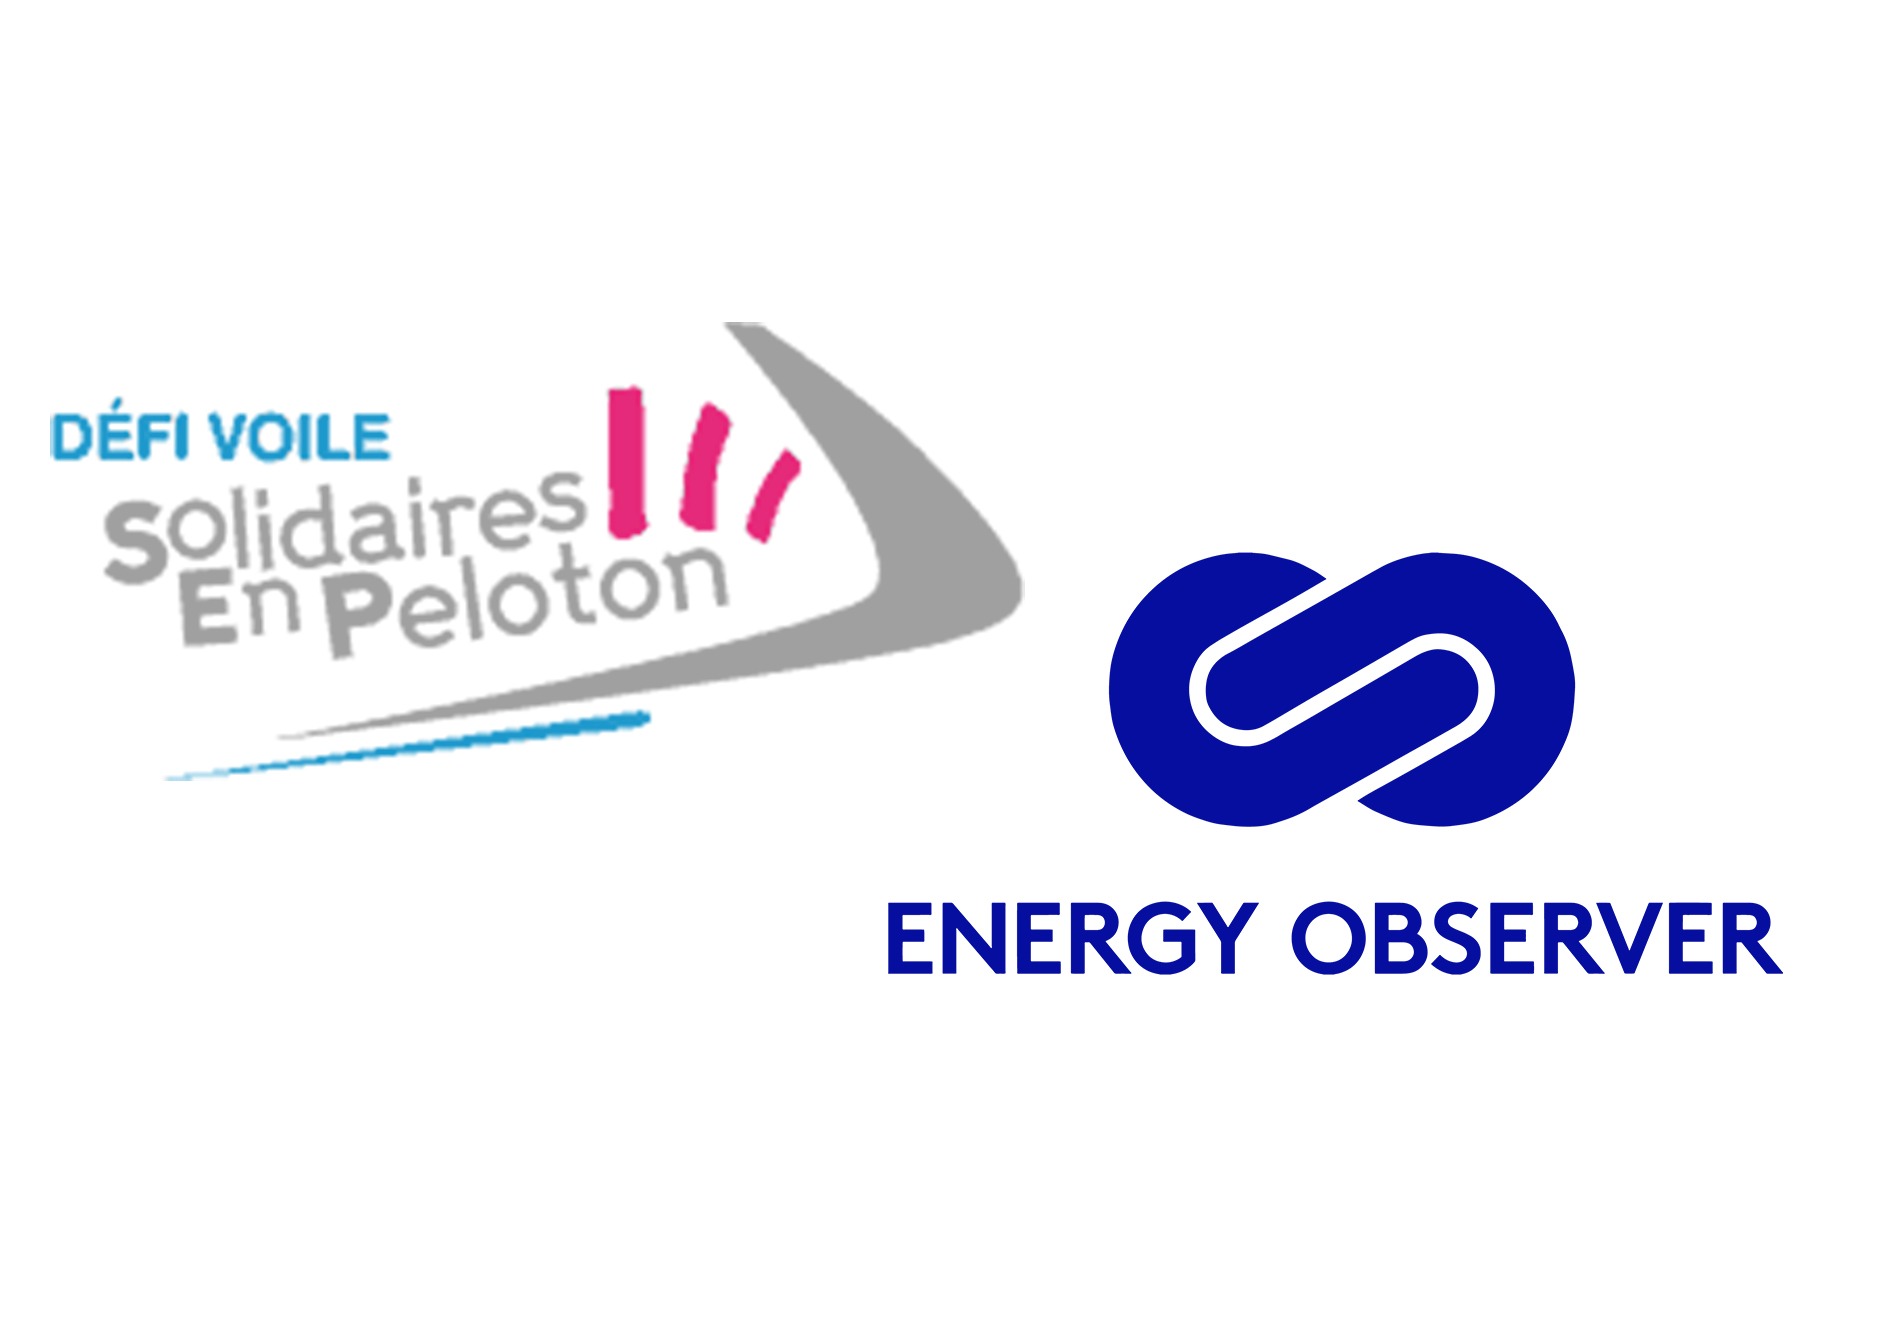 United with and committed to ENERGY OBSERVER and SOLIDAIRES EN PELOTON – ARSEP